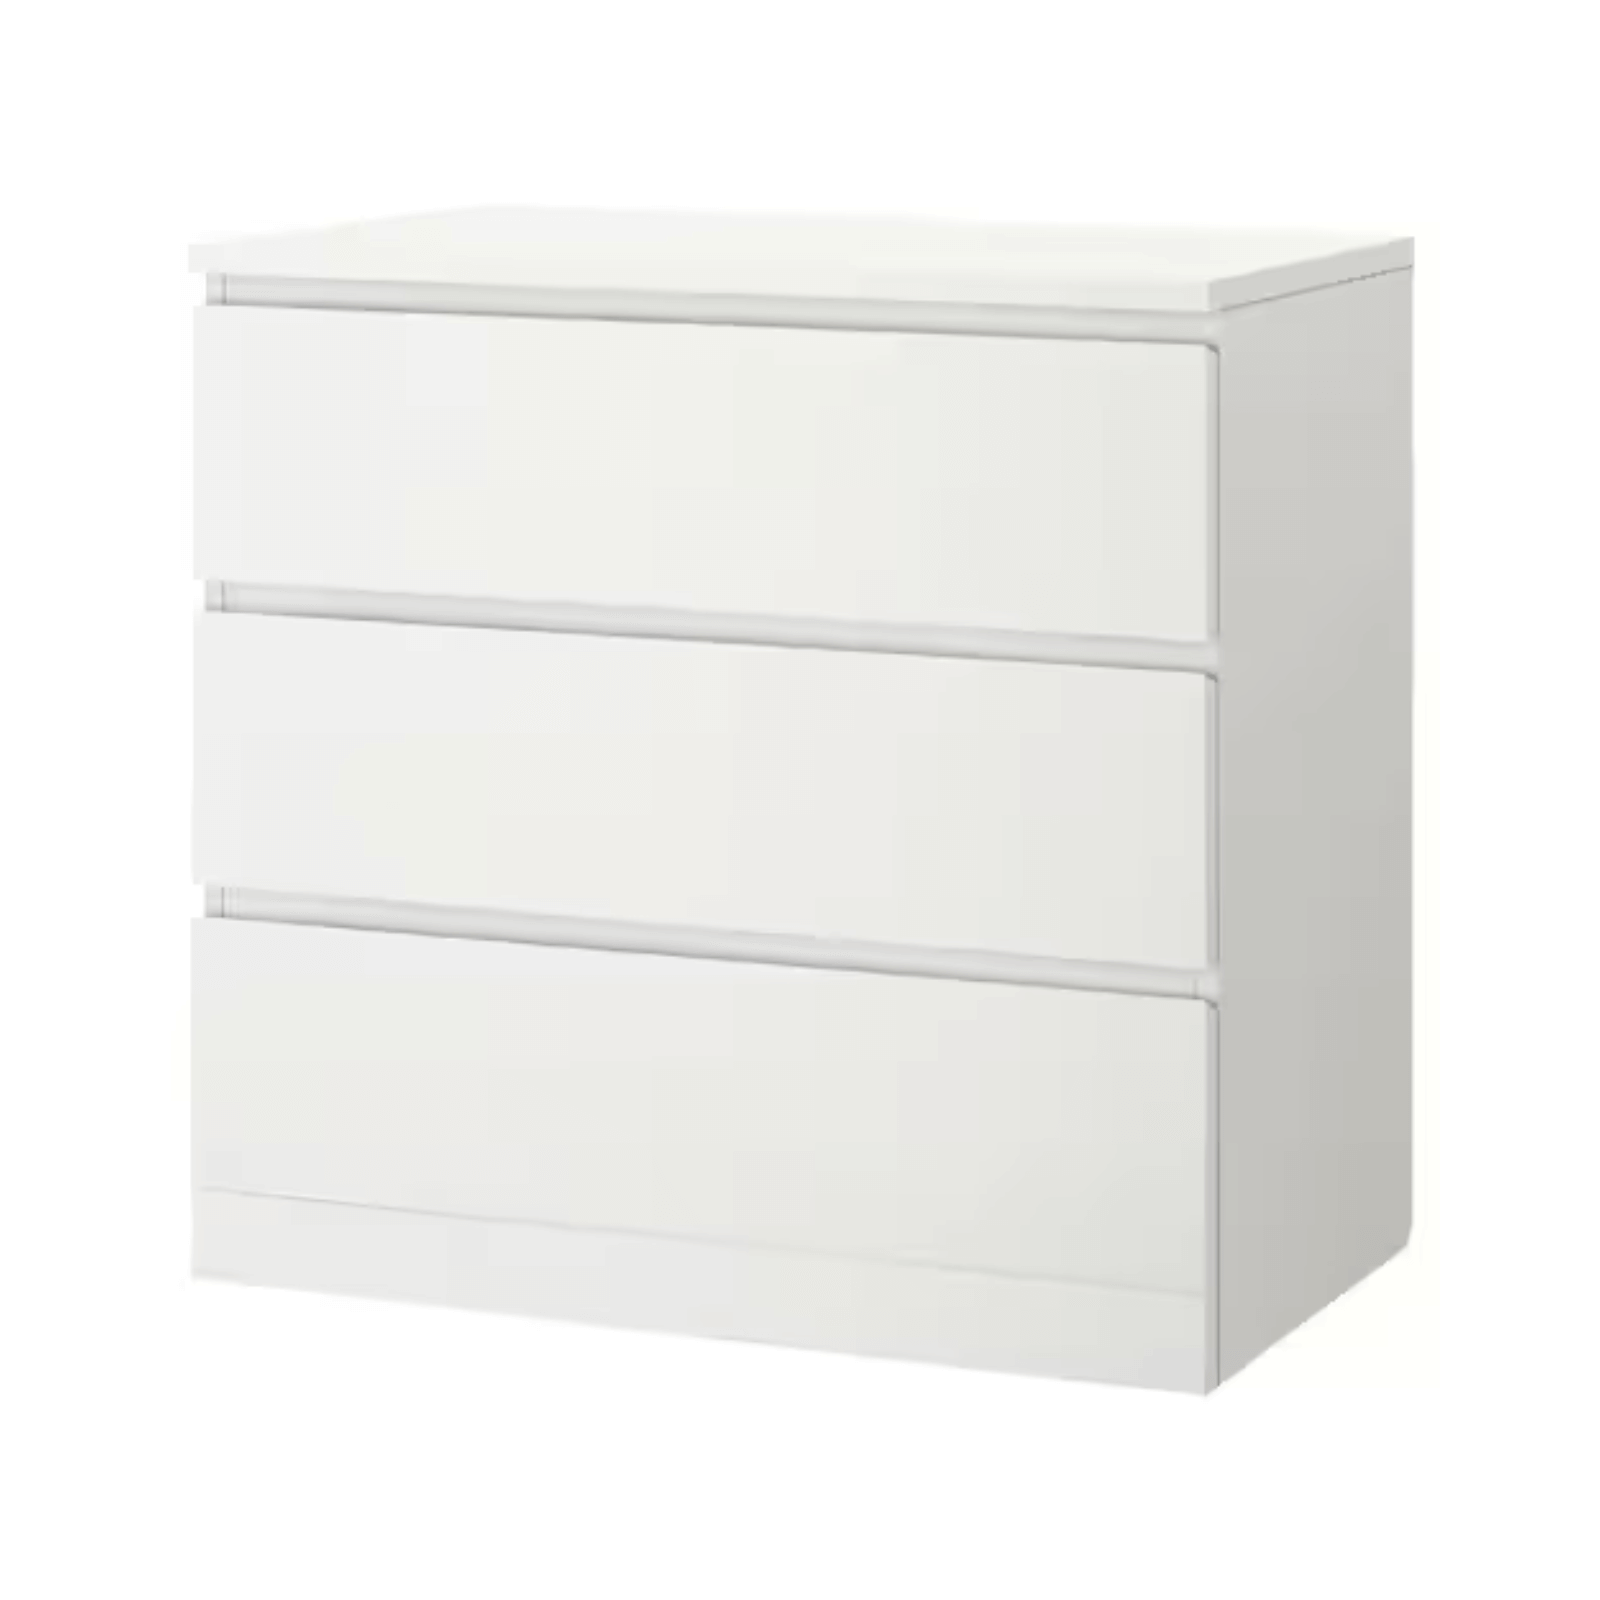 MALM Chest of 3 Drawers